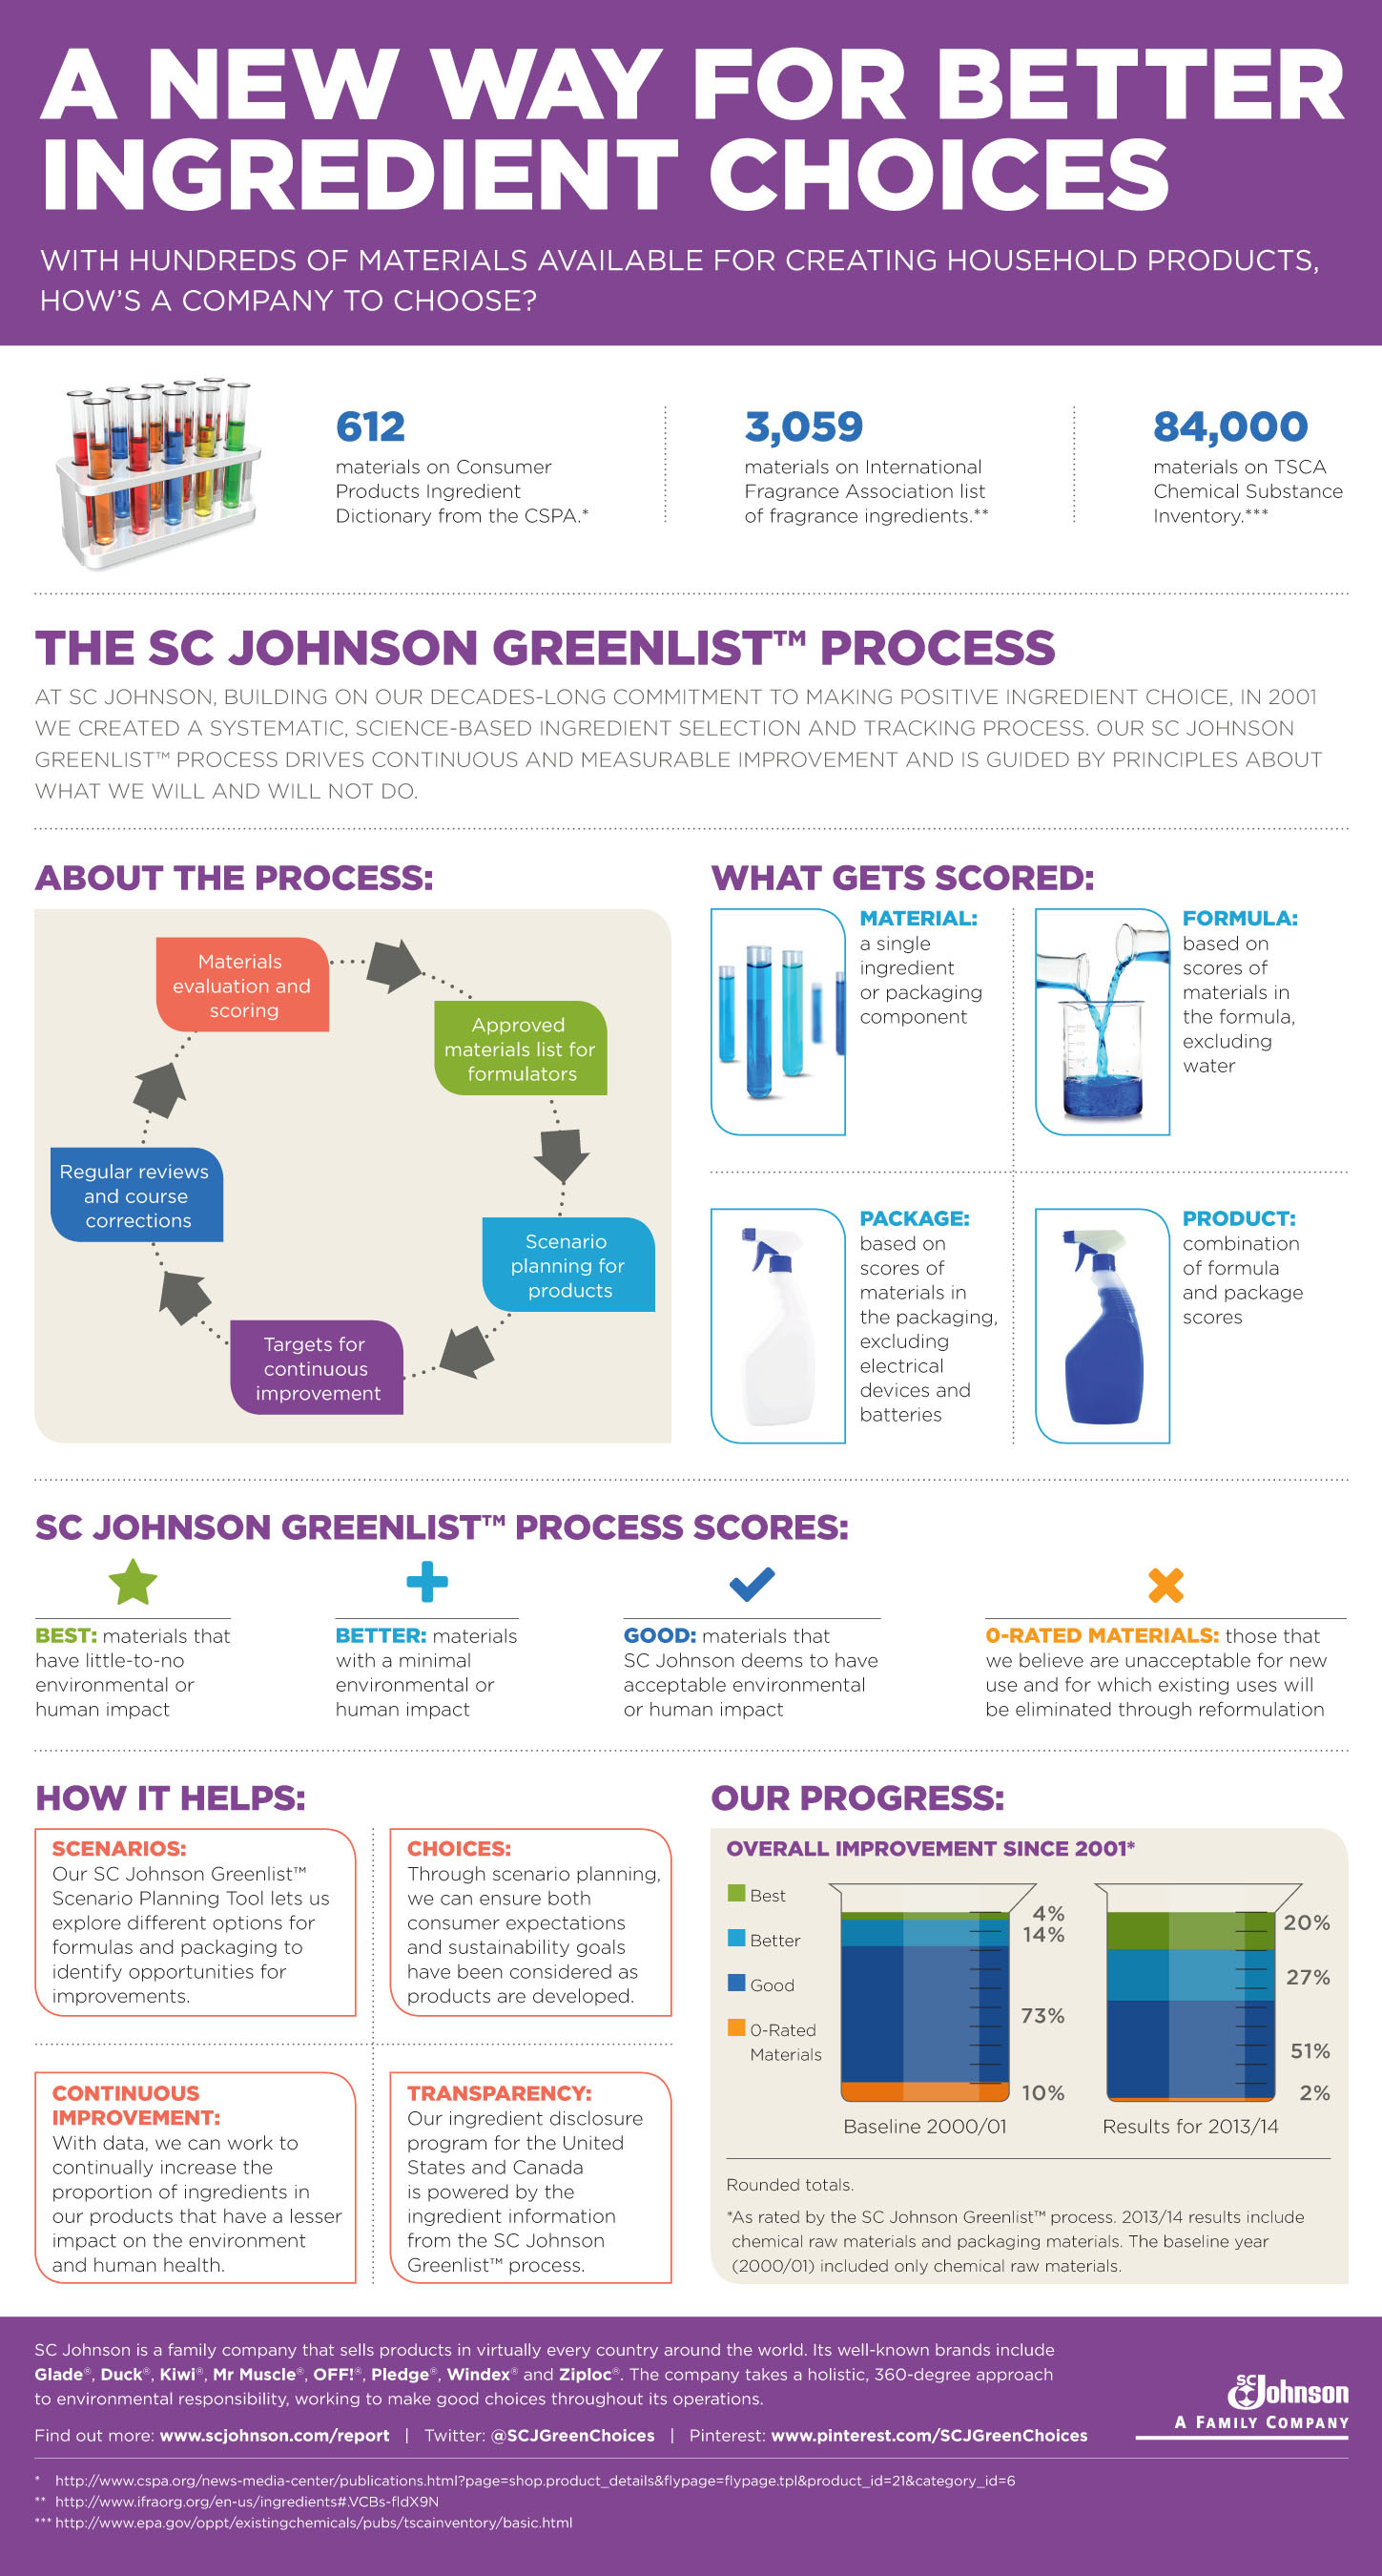 Since it was introduced in 2001, the SC Johnson Greenlist(TM) process has more than doubled the percentage of ingredients ranked "Better" or "Best" in SC Johnson products.